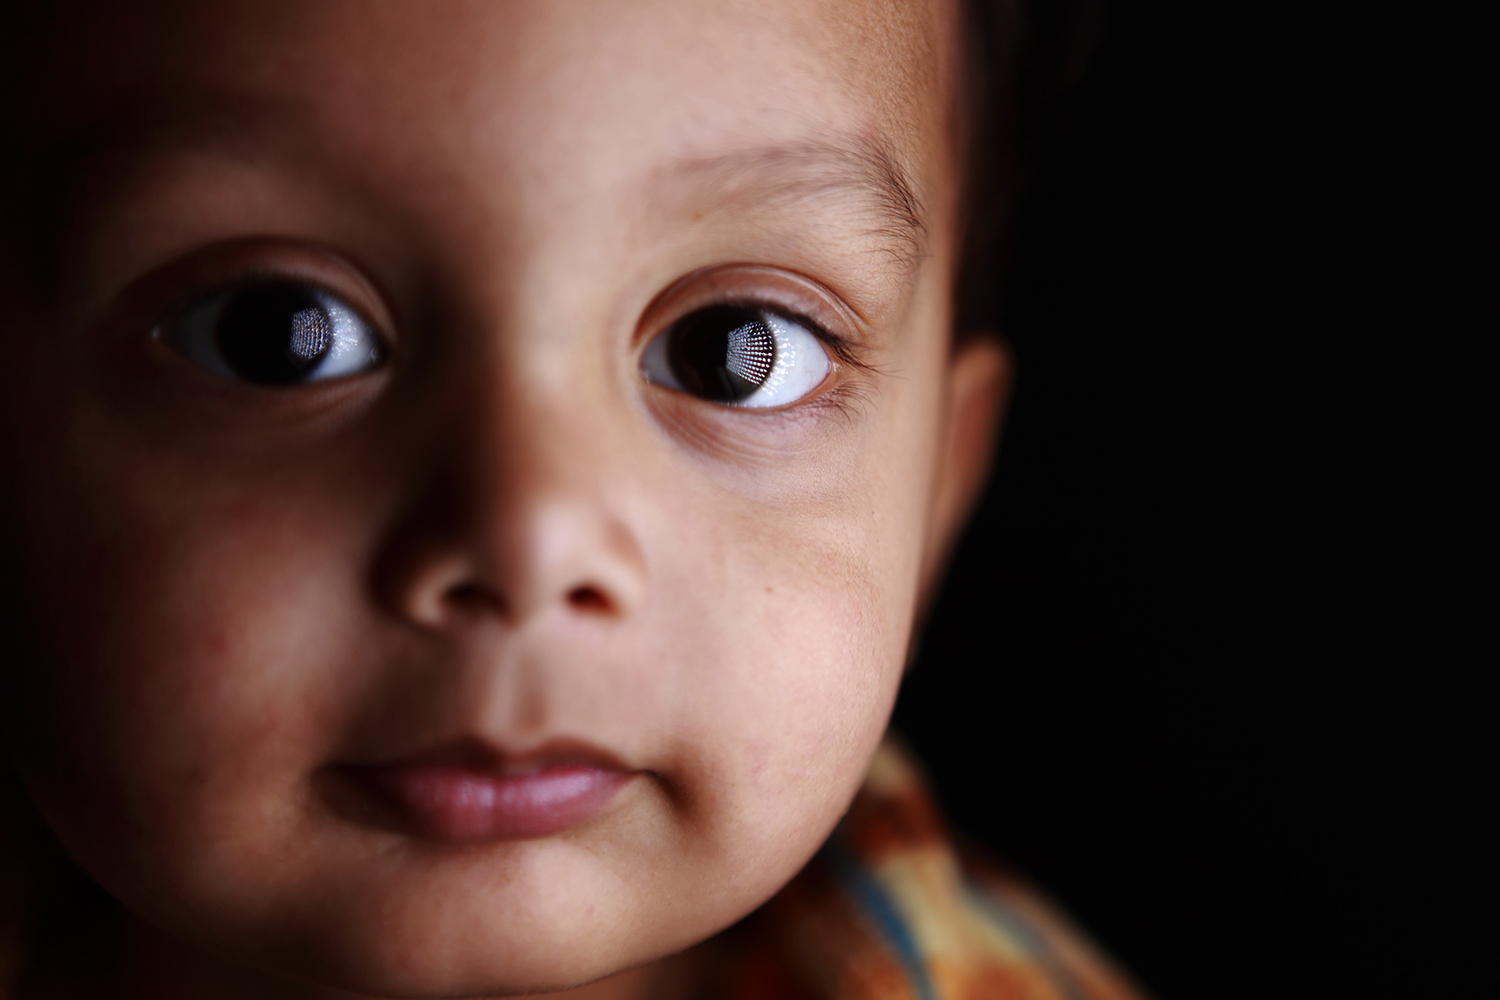 Two-year-old East Indian boy looks forward to a hopeful future.